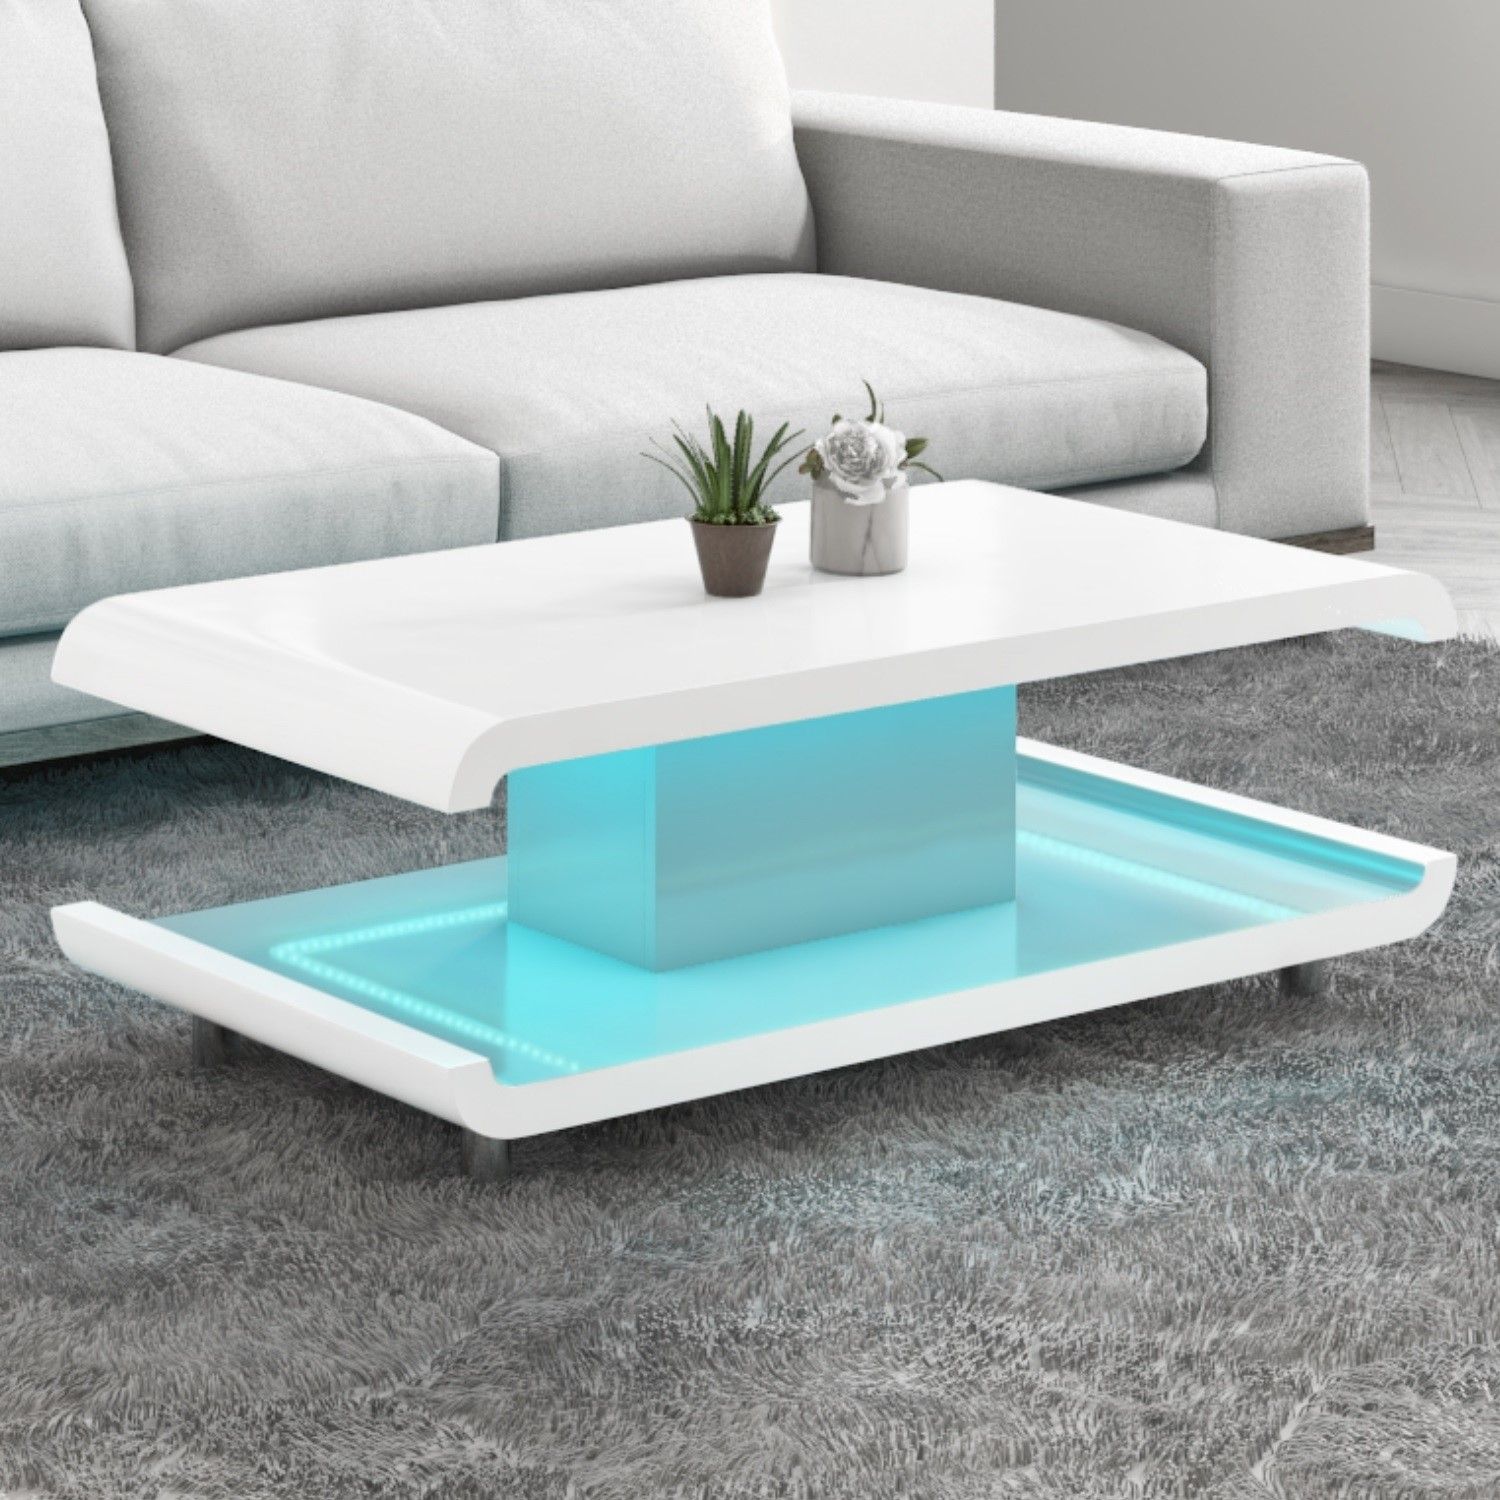 High Gloss White Coffee Table Led Range | Offer Of The Day Throughout Coffee Tables With Led Lights (Gallery 7 of 20)